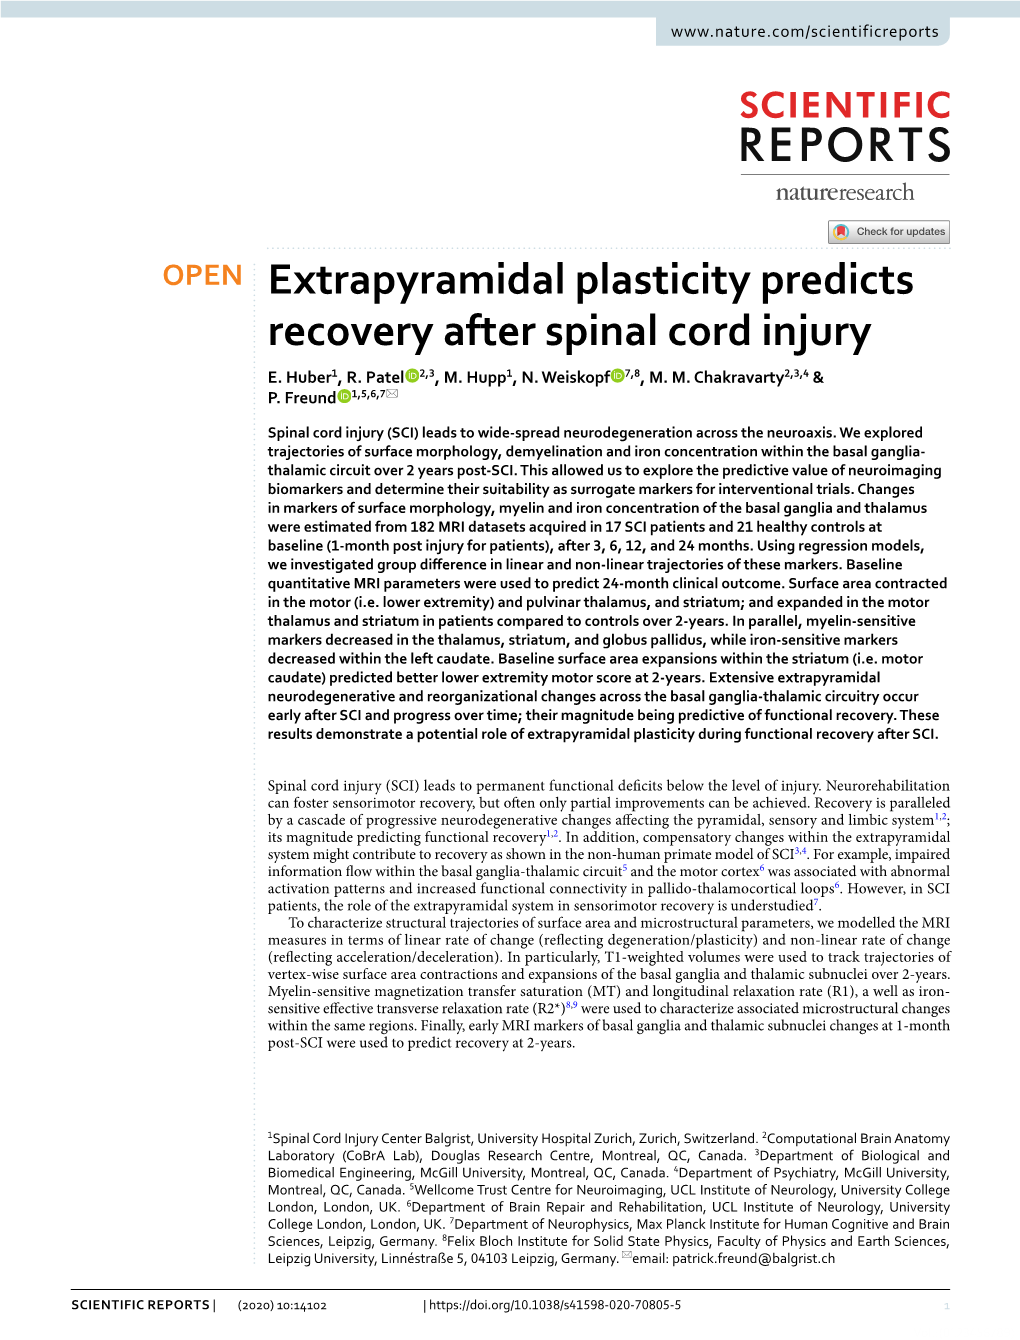 Extrapyramidal Plasticity Predicts Recovery After Spinal Cord Injury E